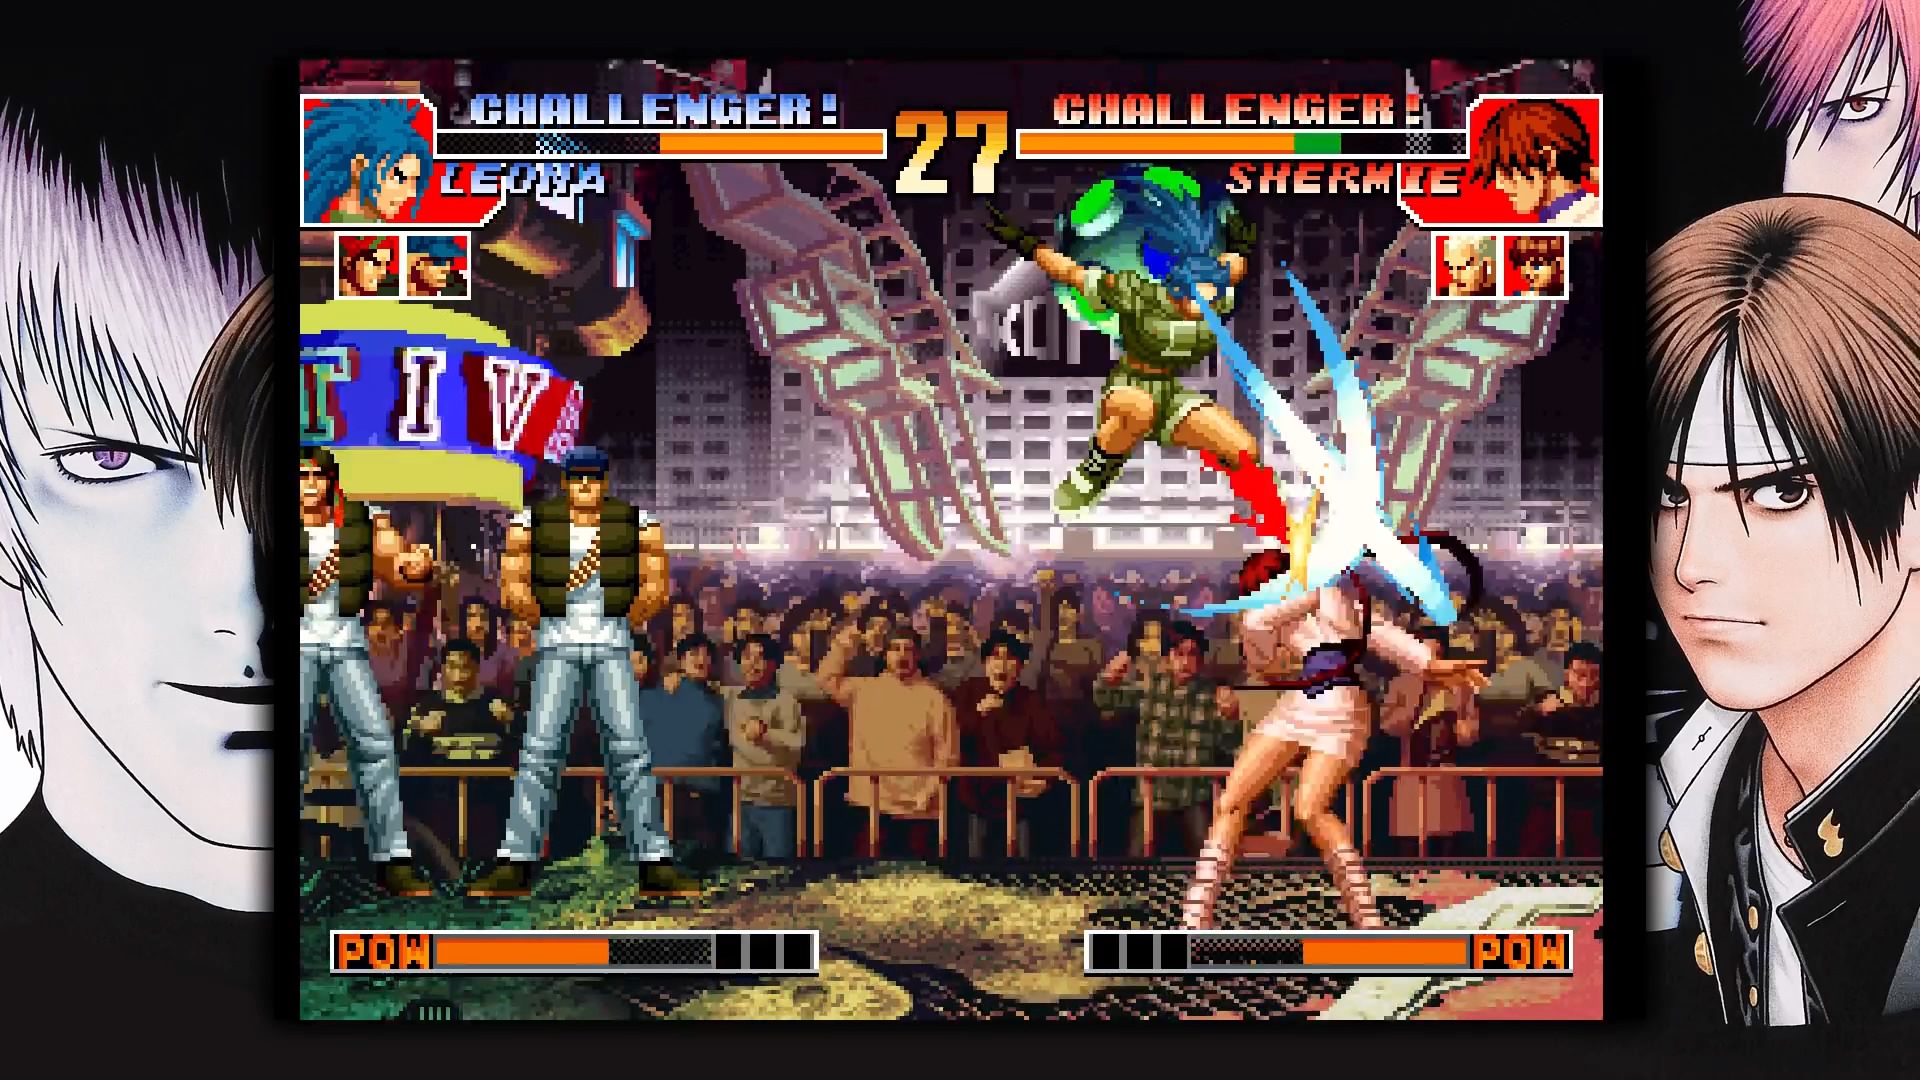 the king of fighters 97 game free download for pc